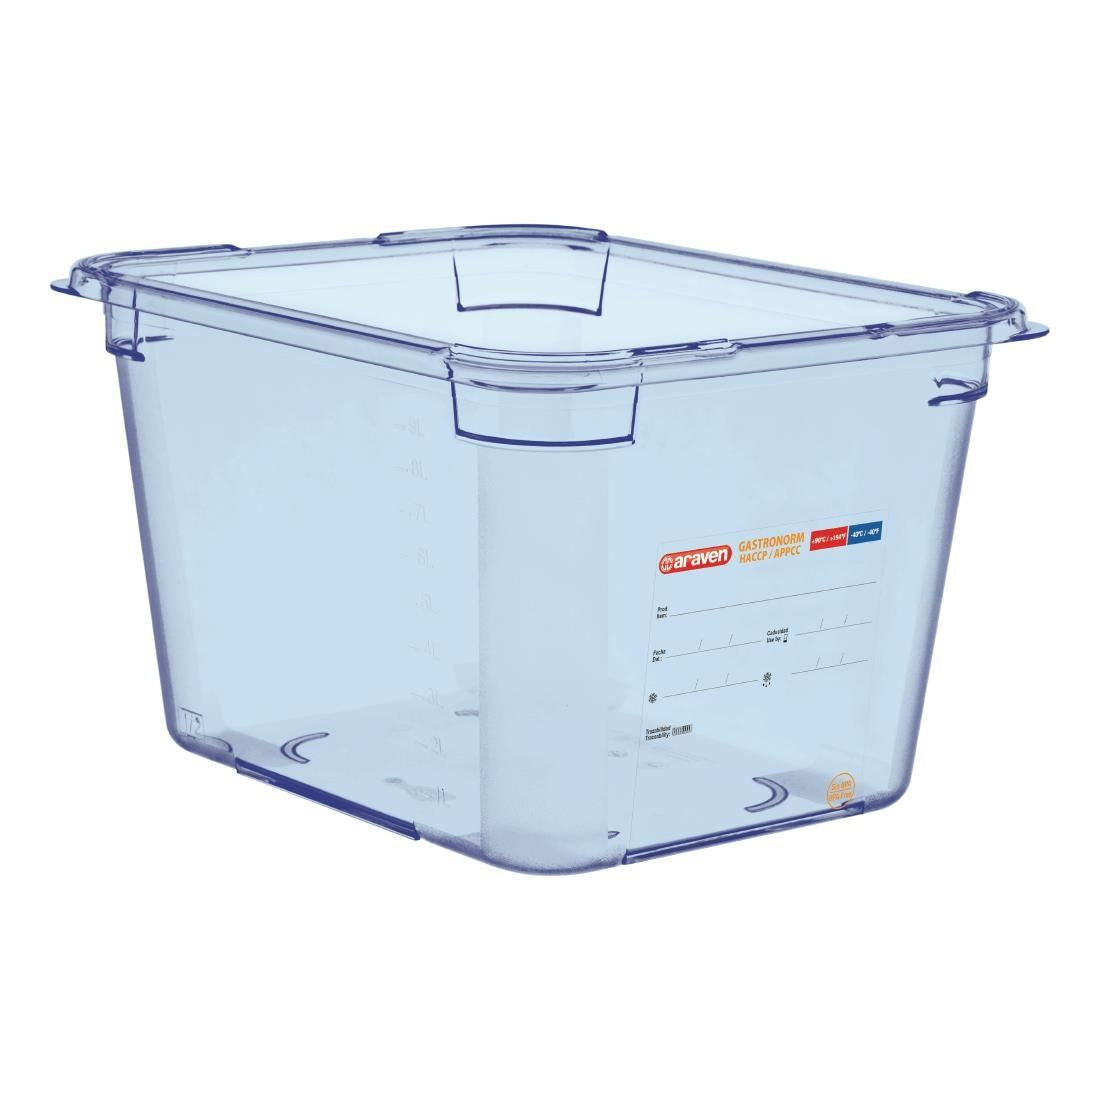 GP586 Araven ABS Food Storage Container Blue GN 1/2 200mm JD Catering Equipment Solutions Ltd